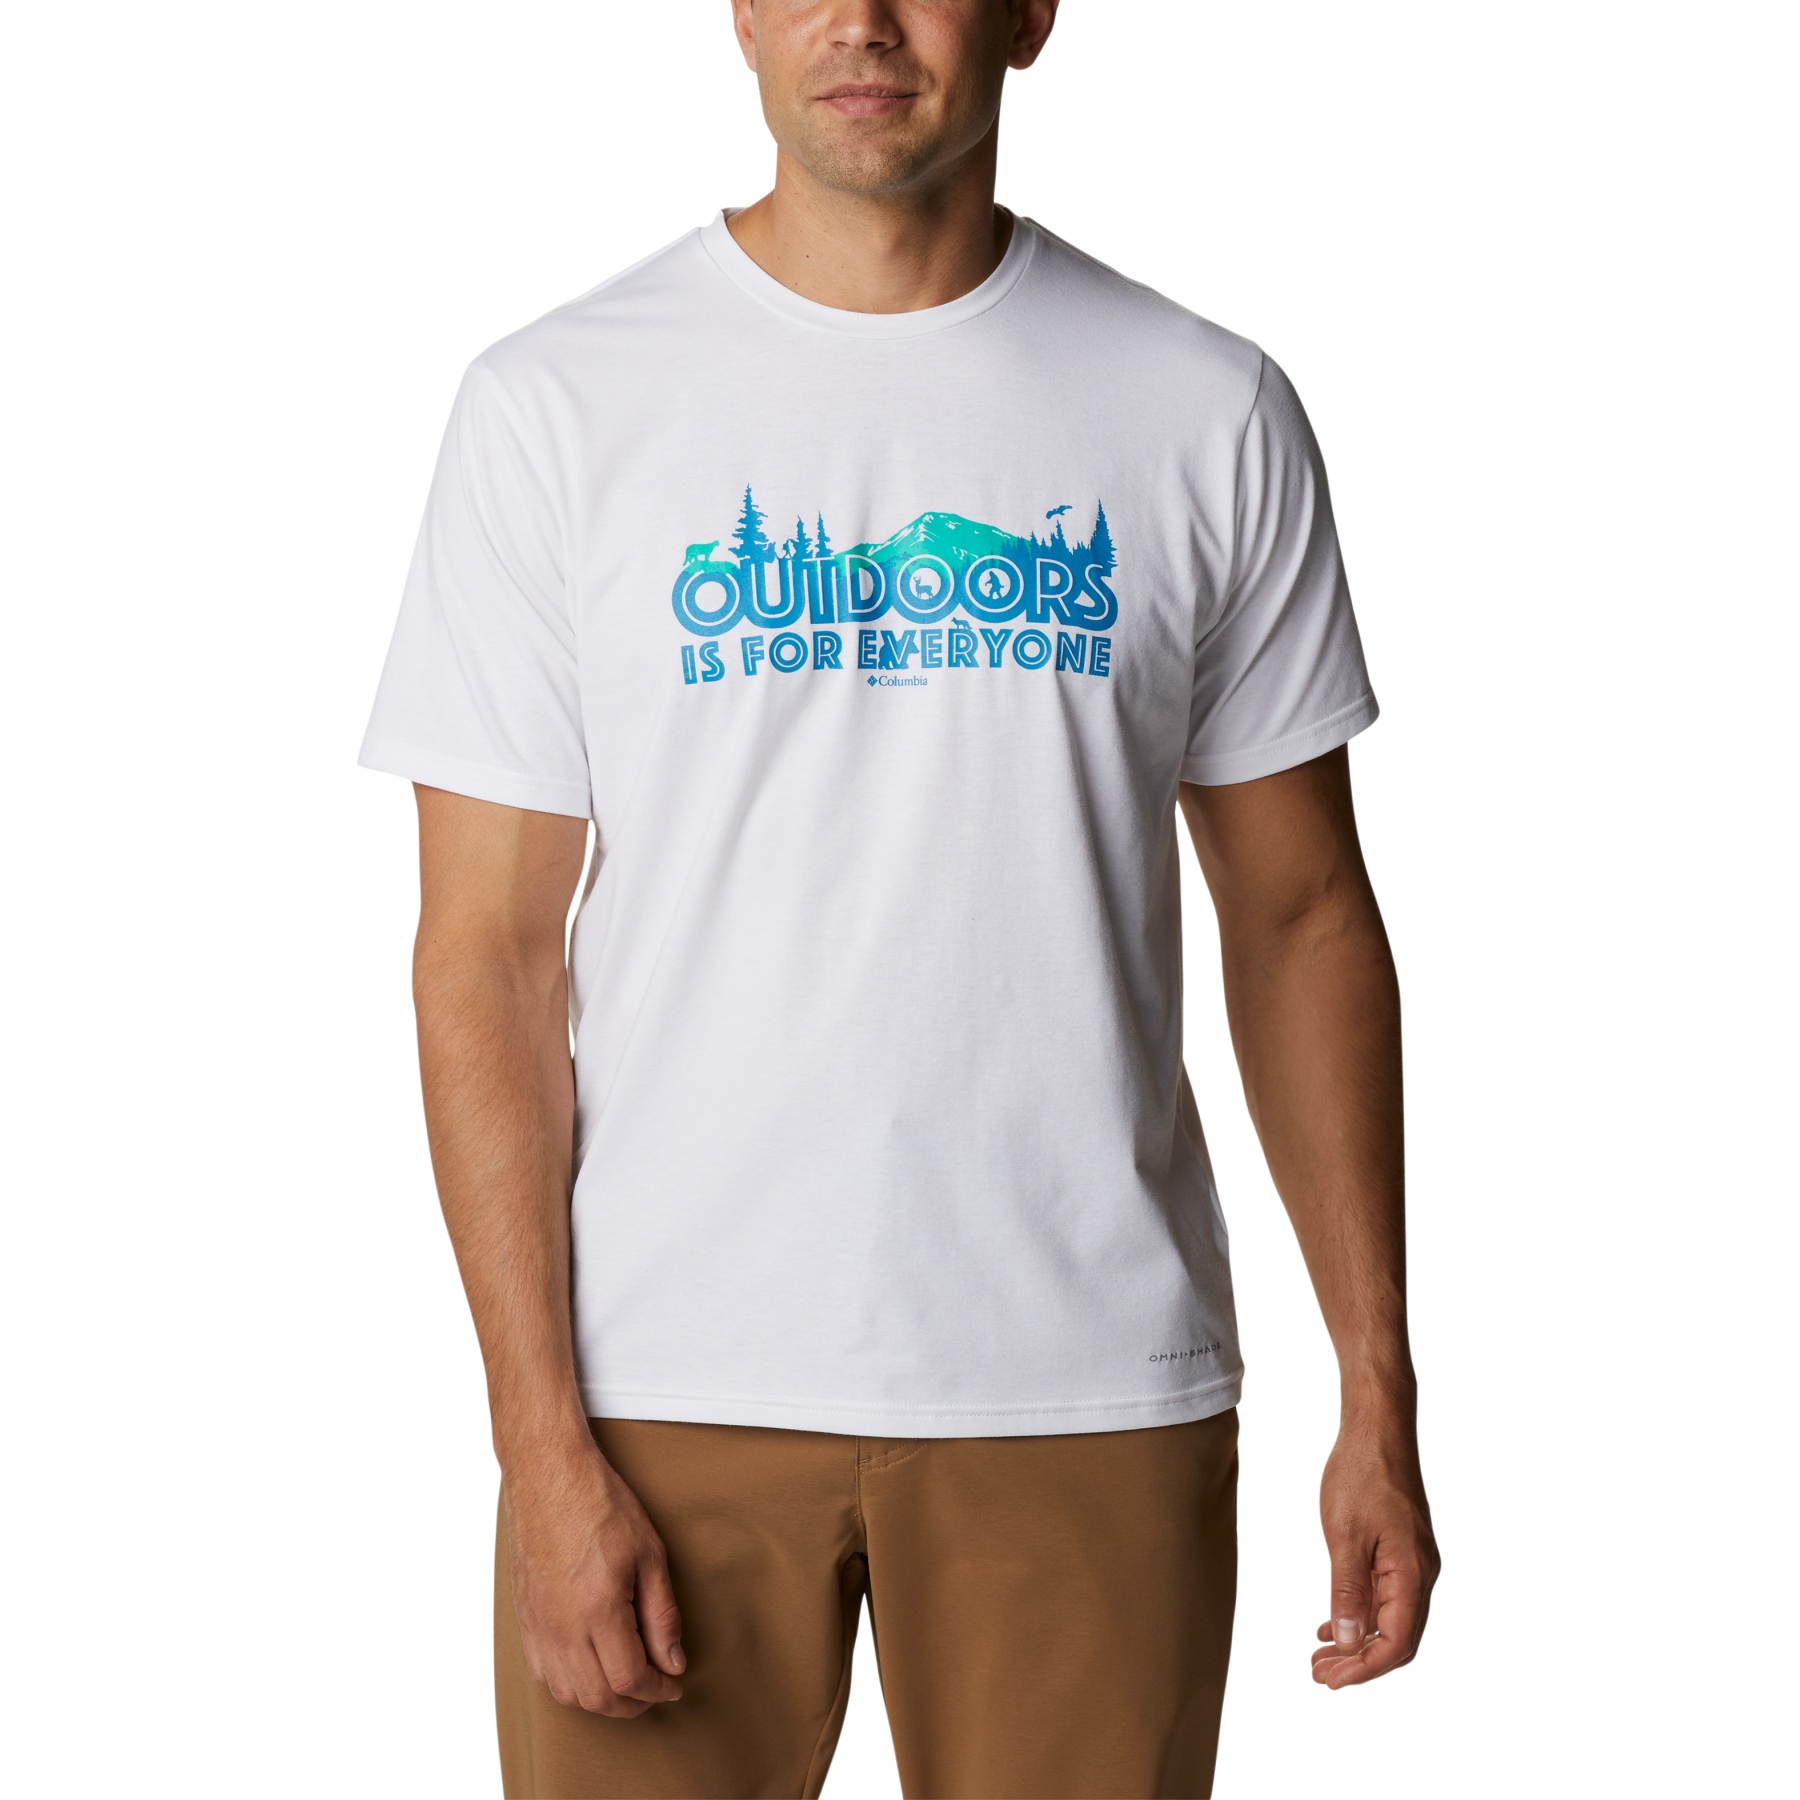 Image of Columbia Sun Trek Graphic T-Shirt - White, All For Outdoors Graphic